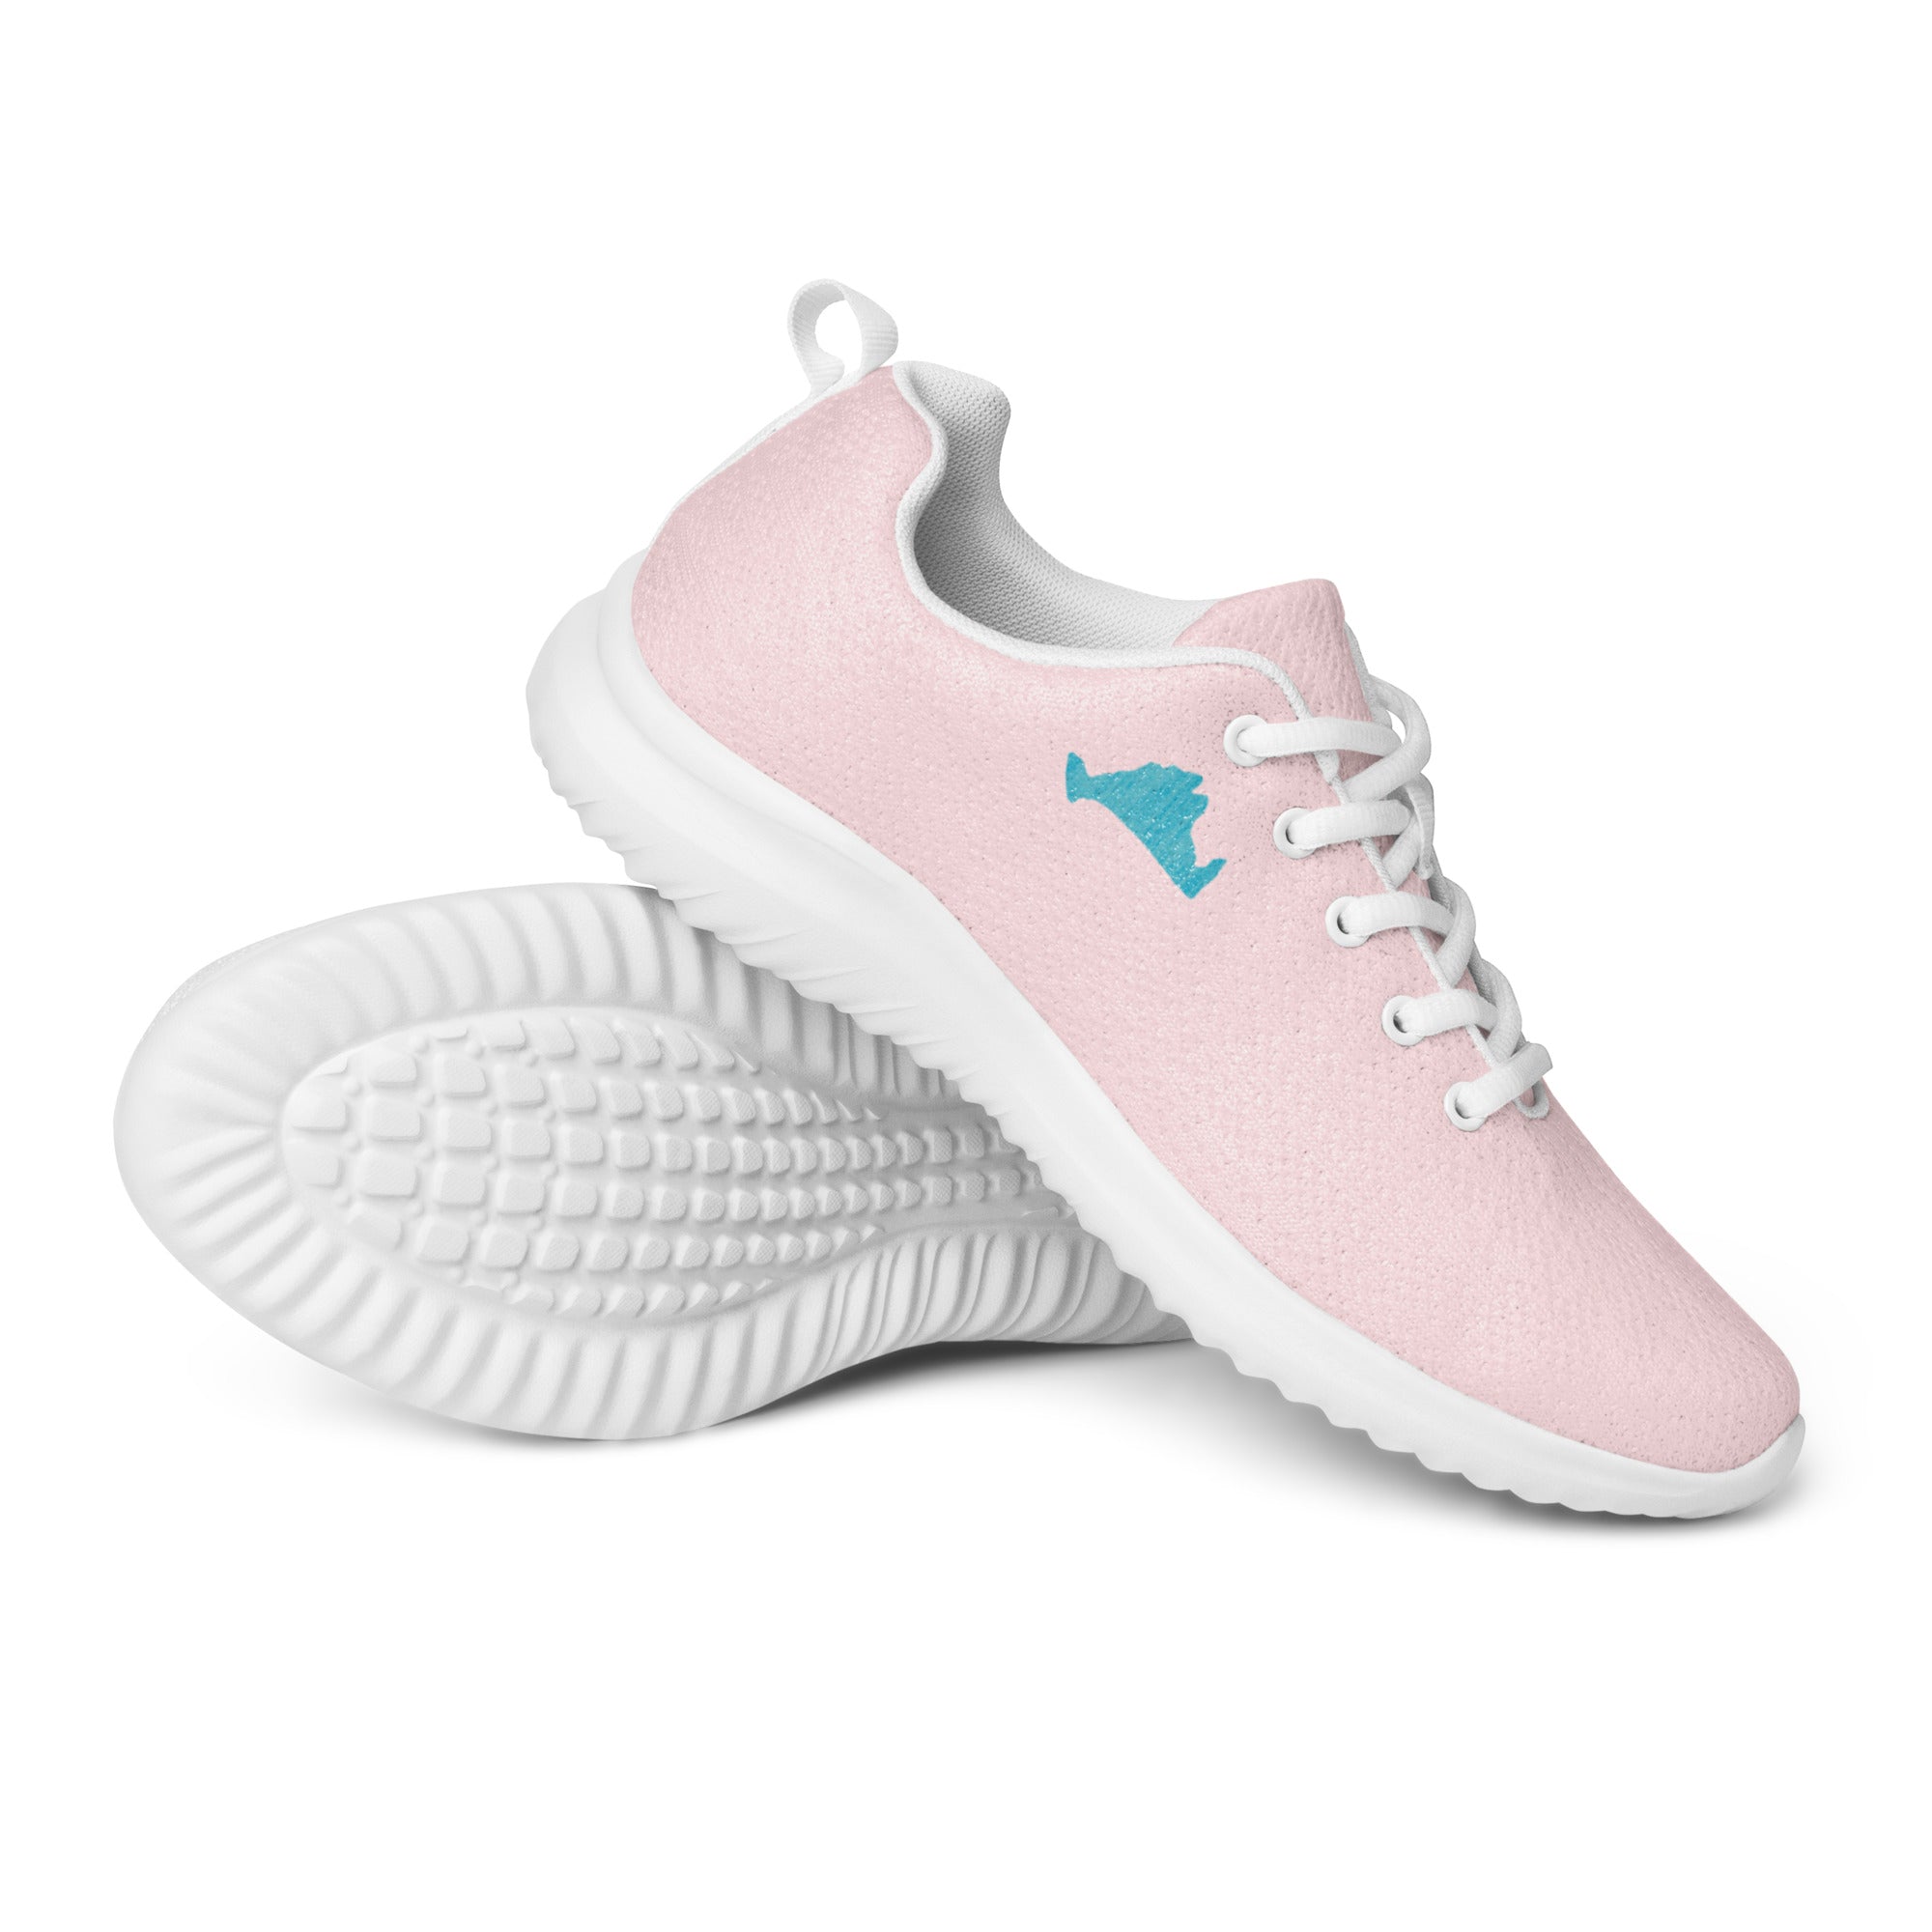 Pink and Teal Women’s Sneaker